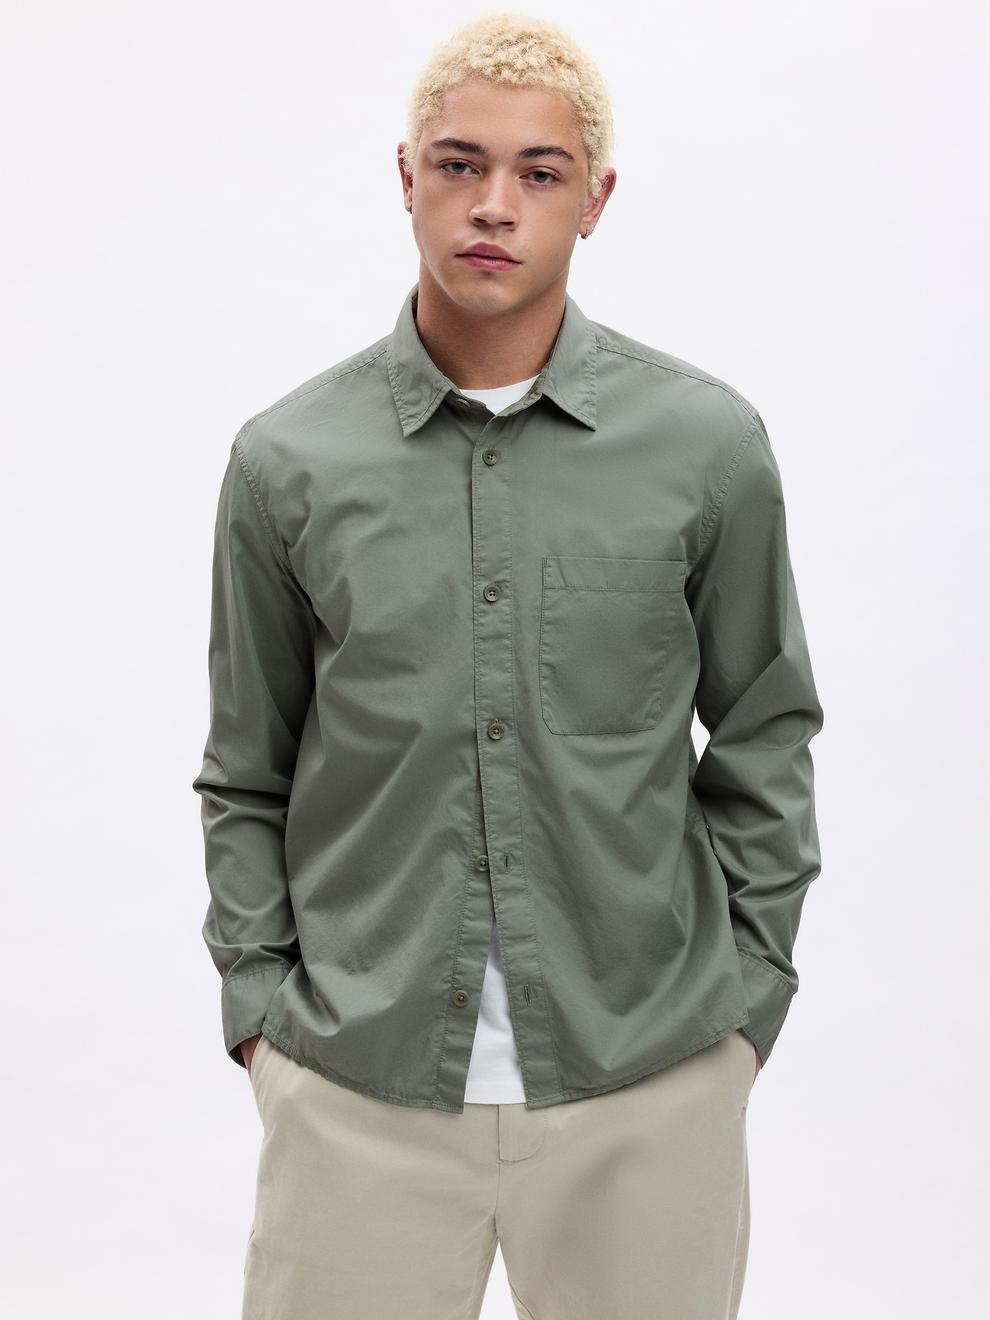 Relaxed Twill Shirt offers at 137 Dhs in Gap